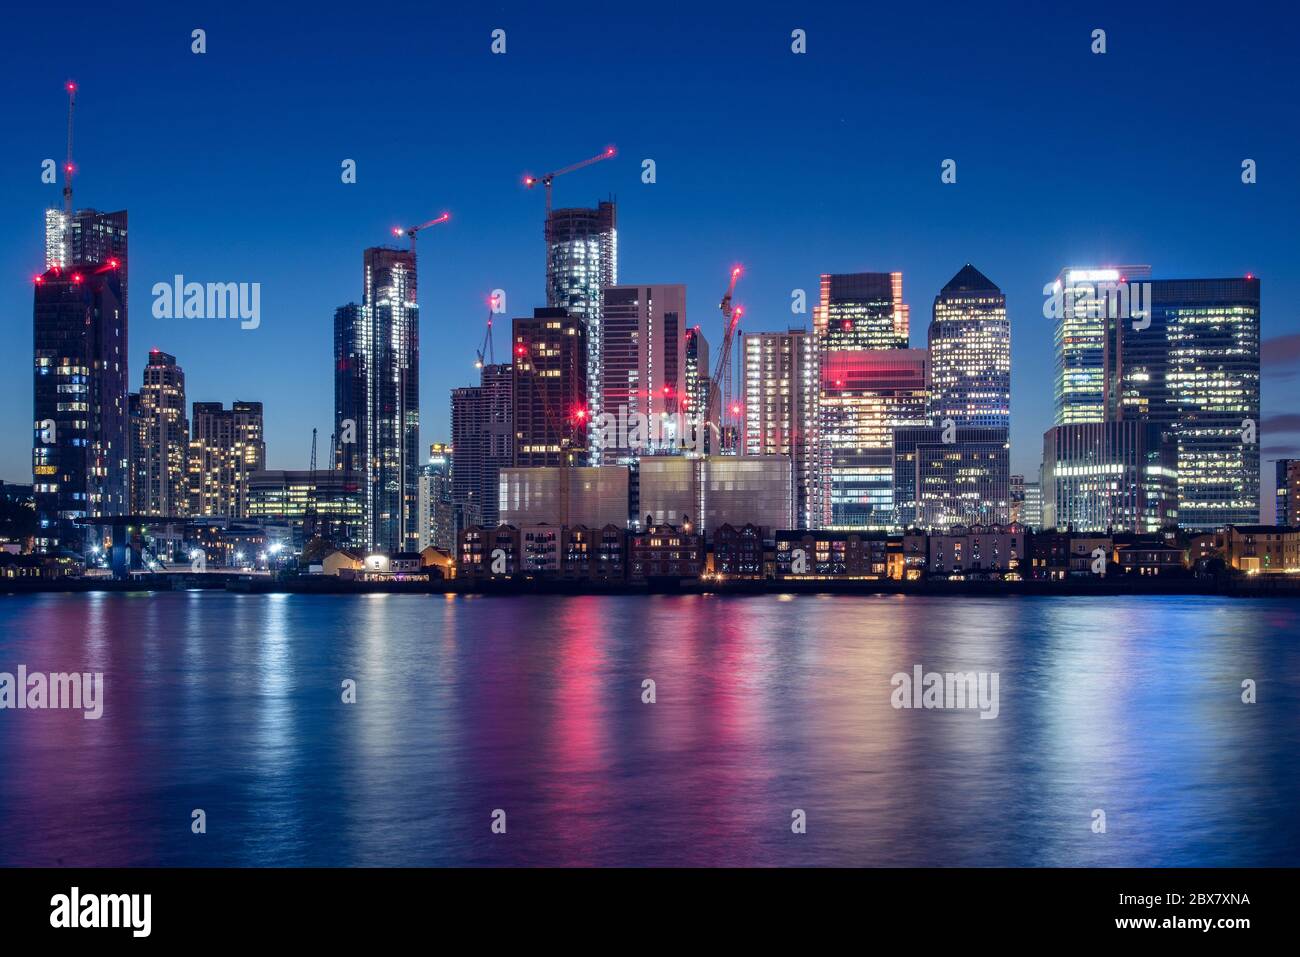 Nigh Time Skyline of Canary Wharf Business District in London, UK Stock Photo